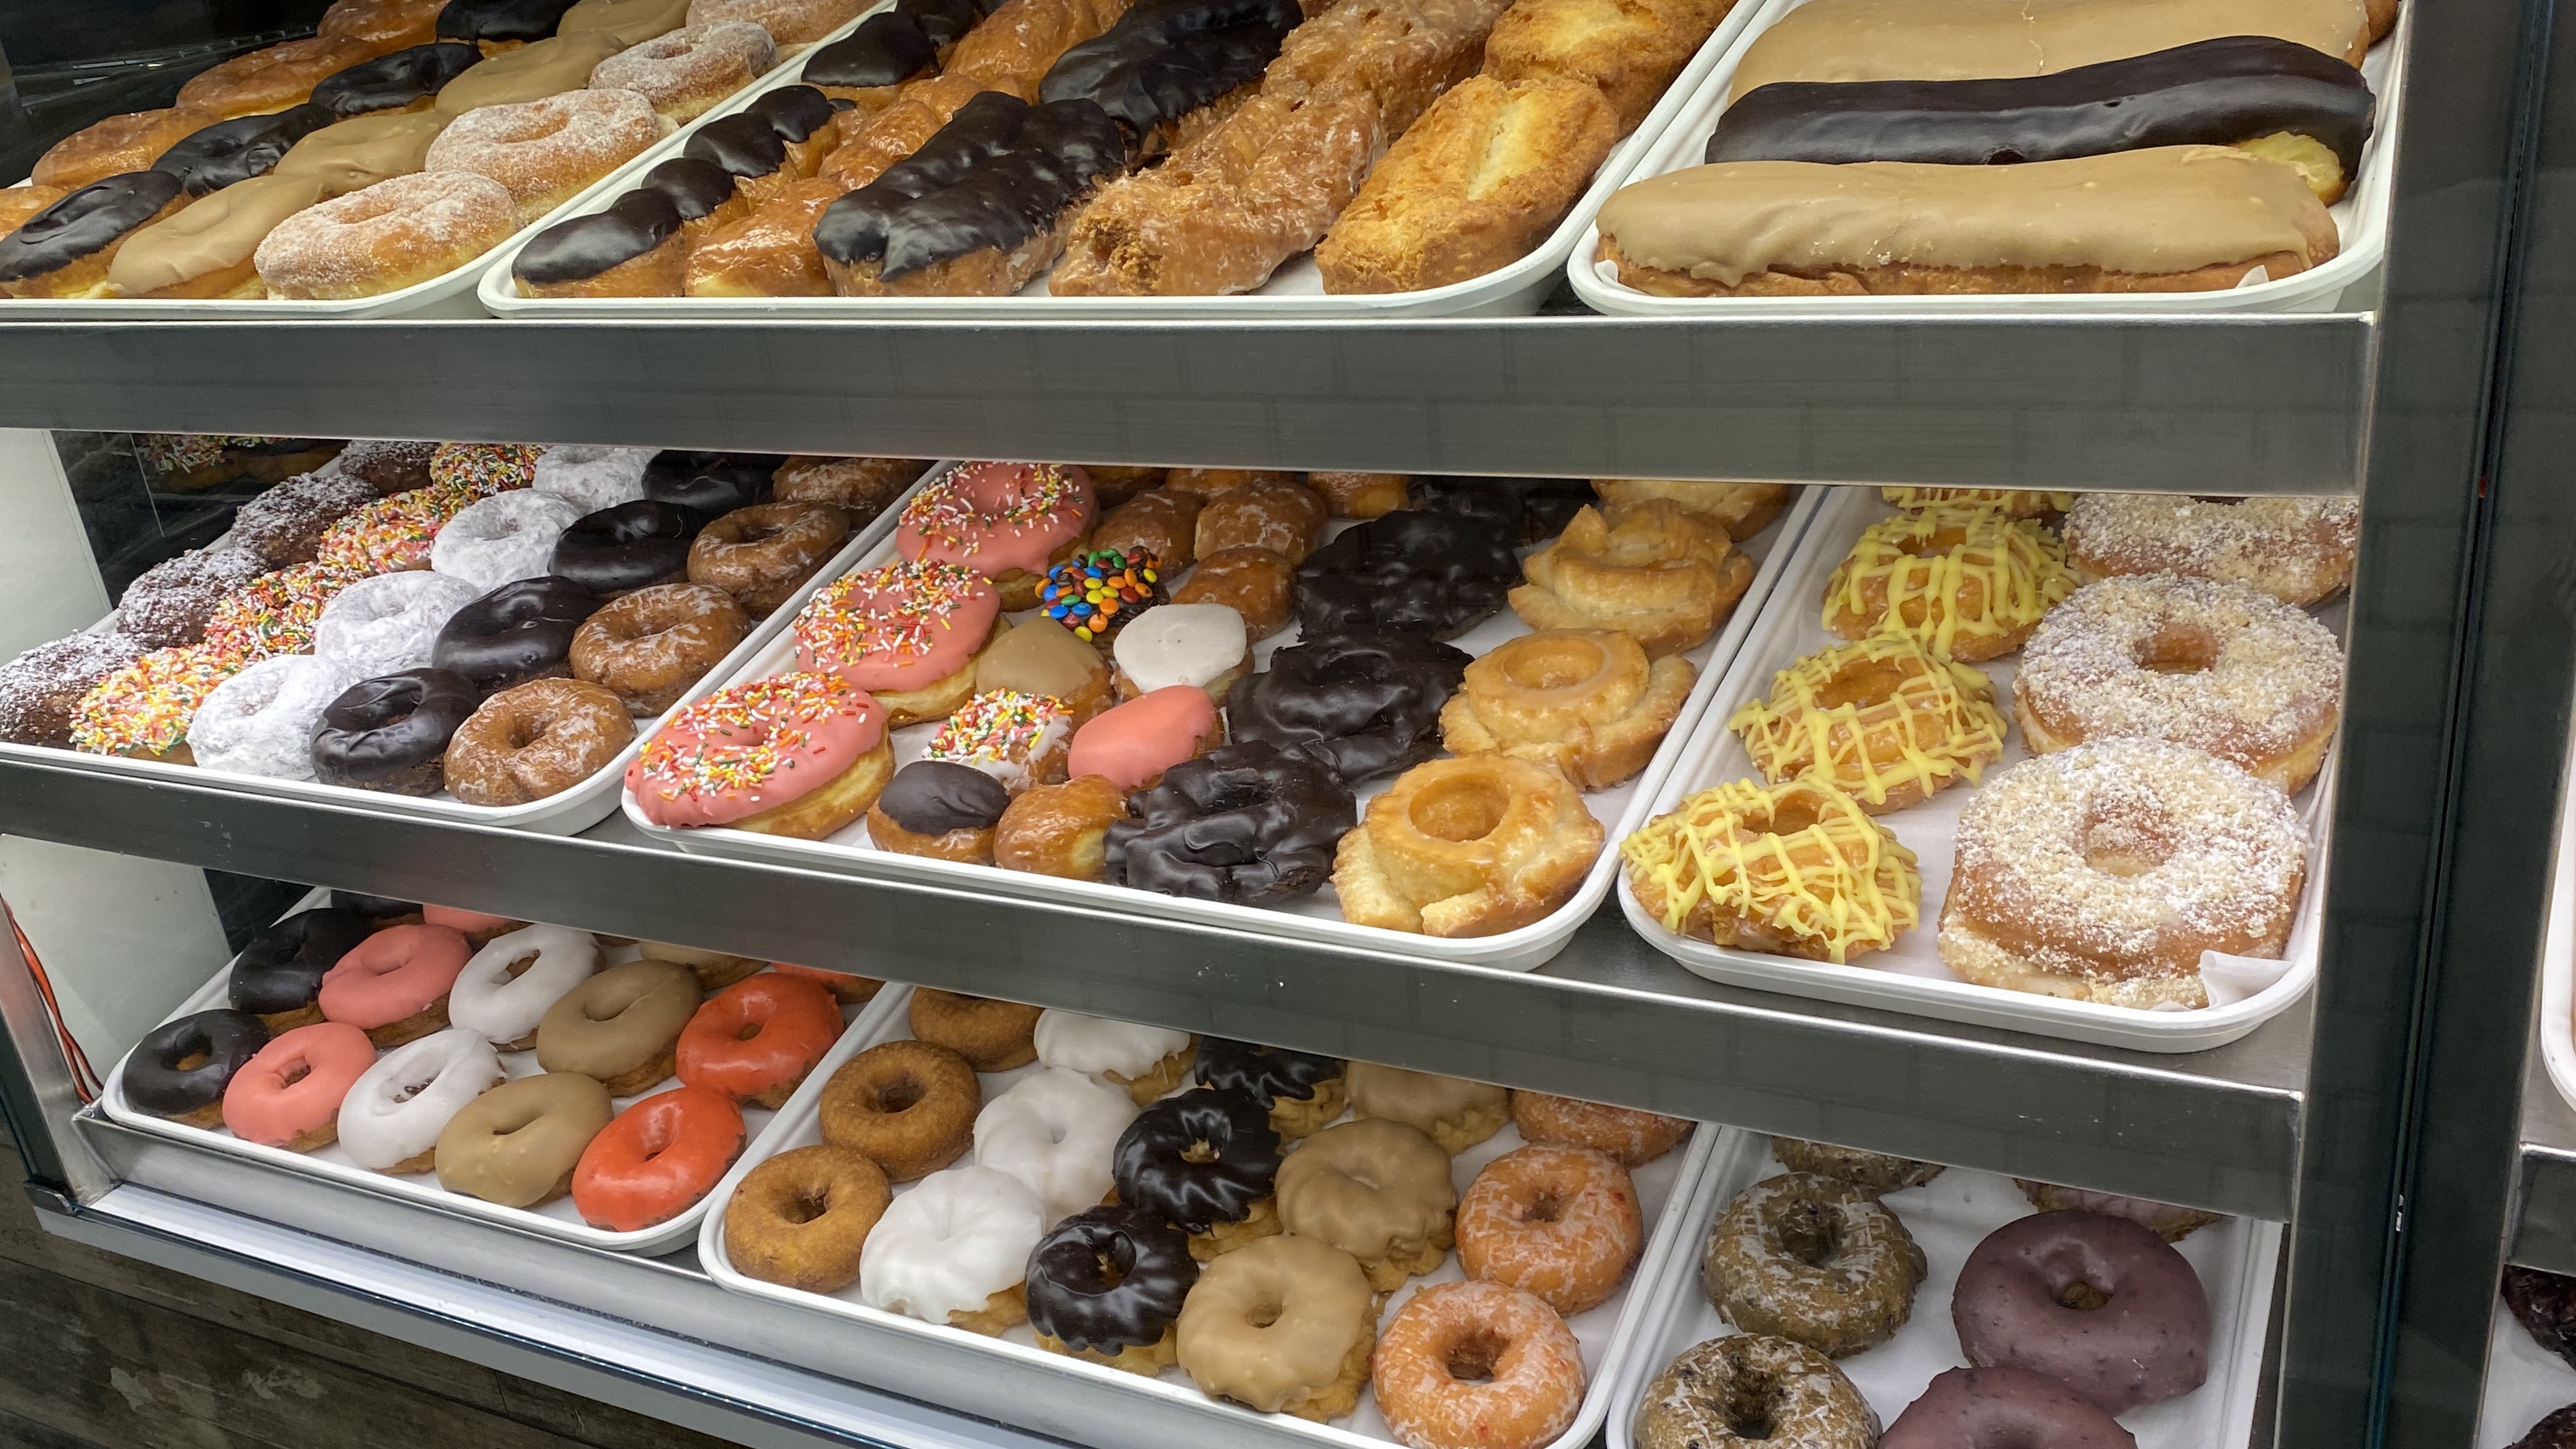 Randy's Donuts offer up to 40 variations of doughnuts! | Photo from Spectrum News 1